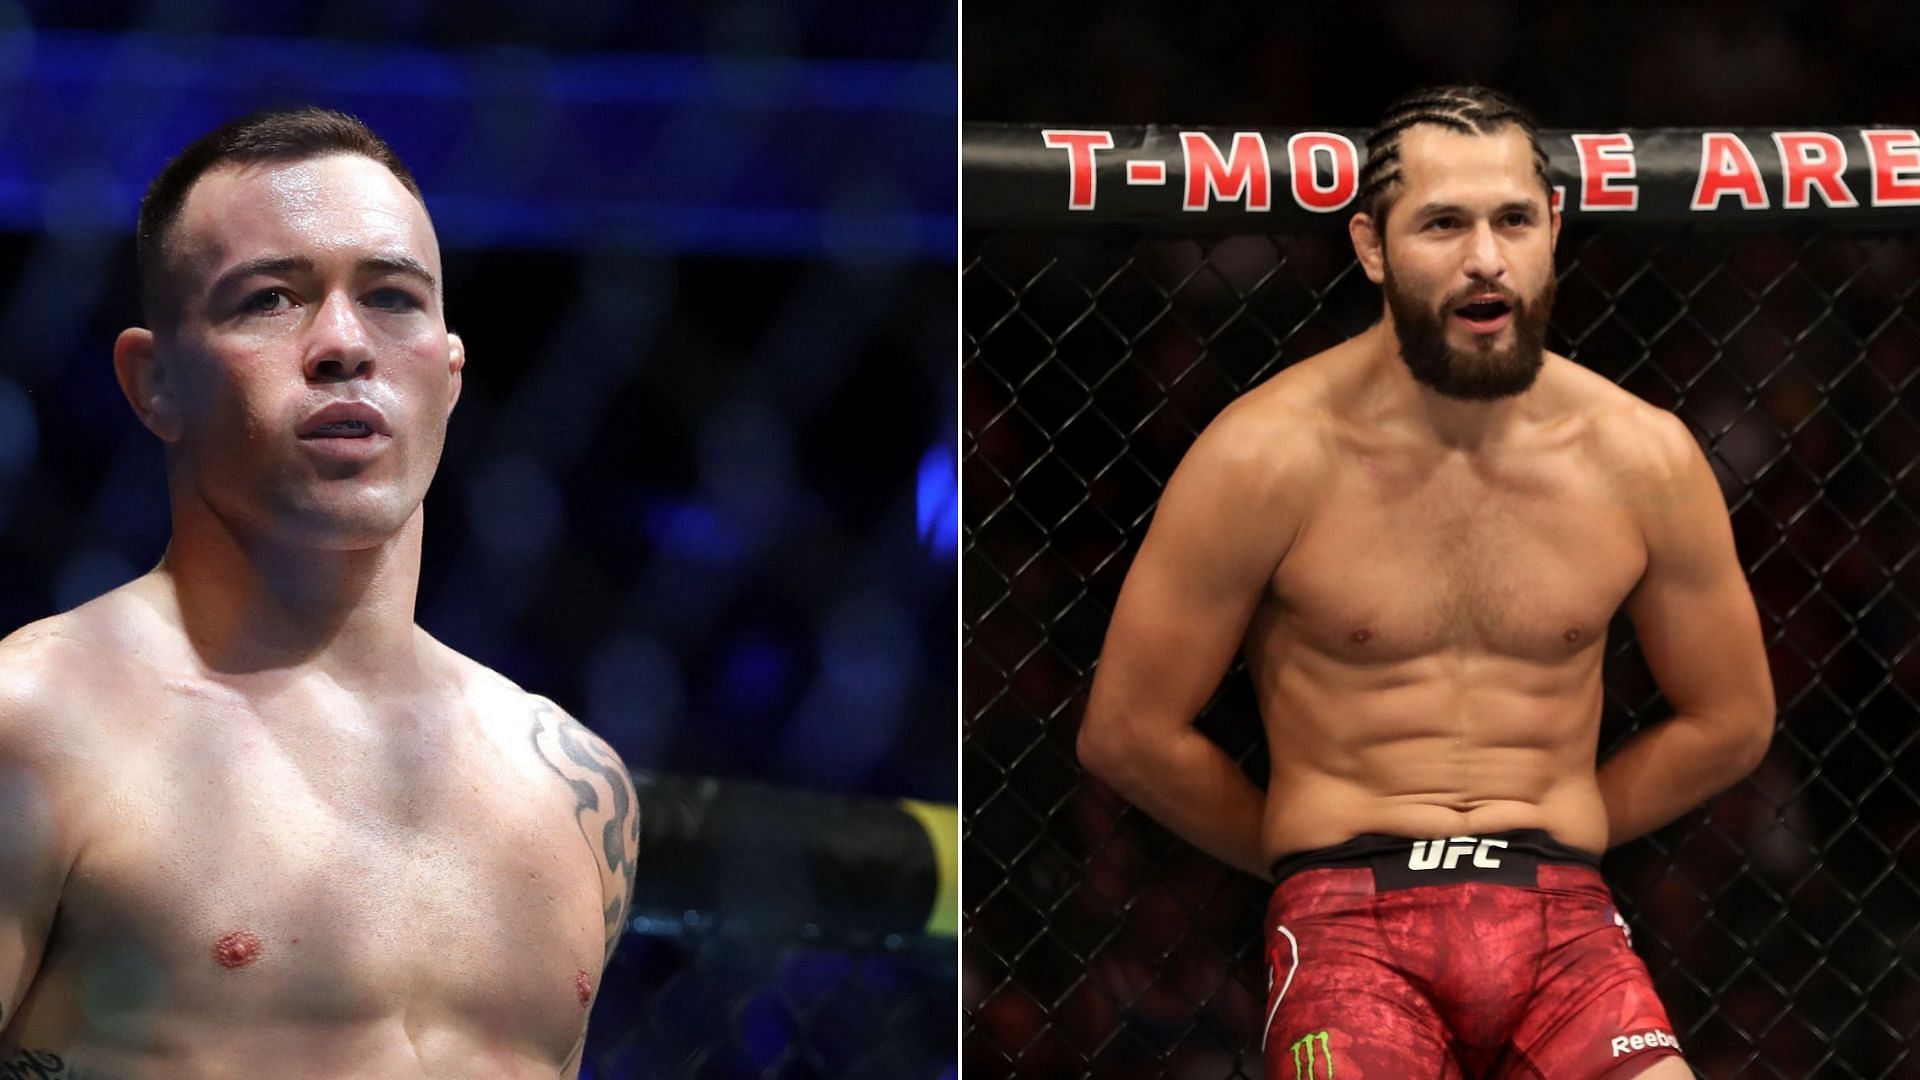 Colby Covington (Left) and Jorge Masvidal (Right) (Image courtesy of Getty)